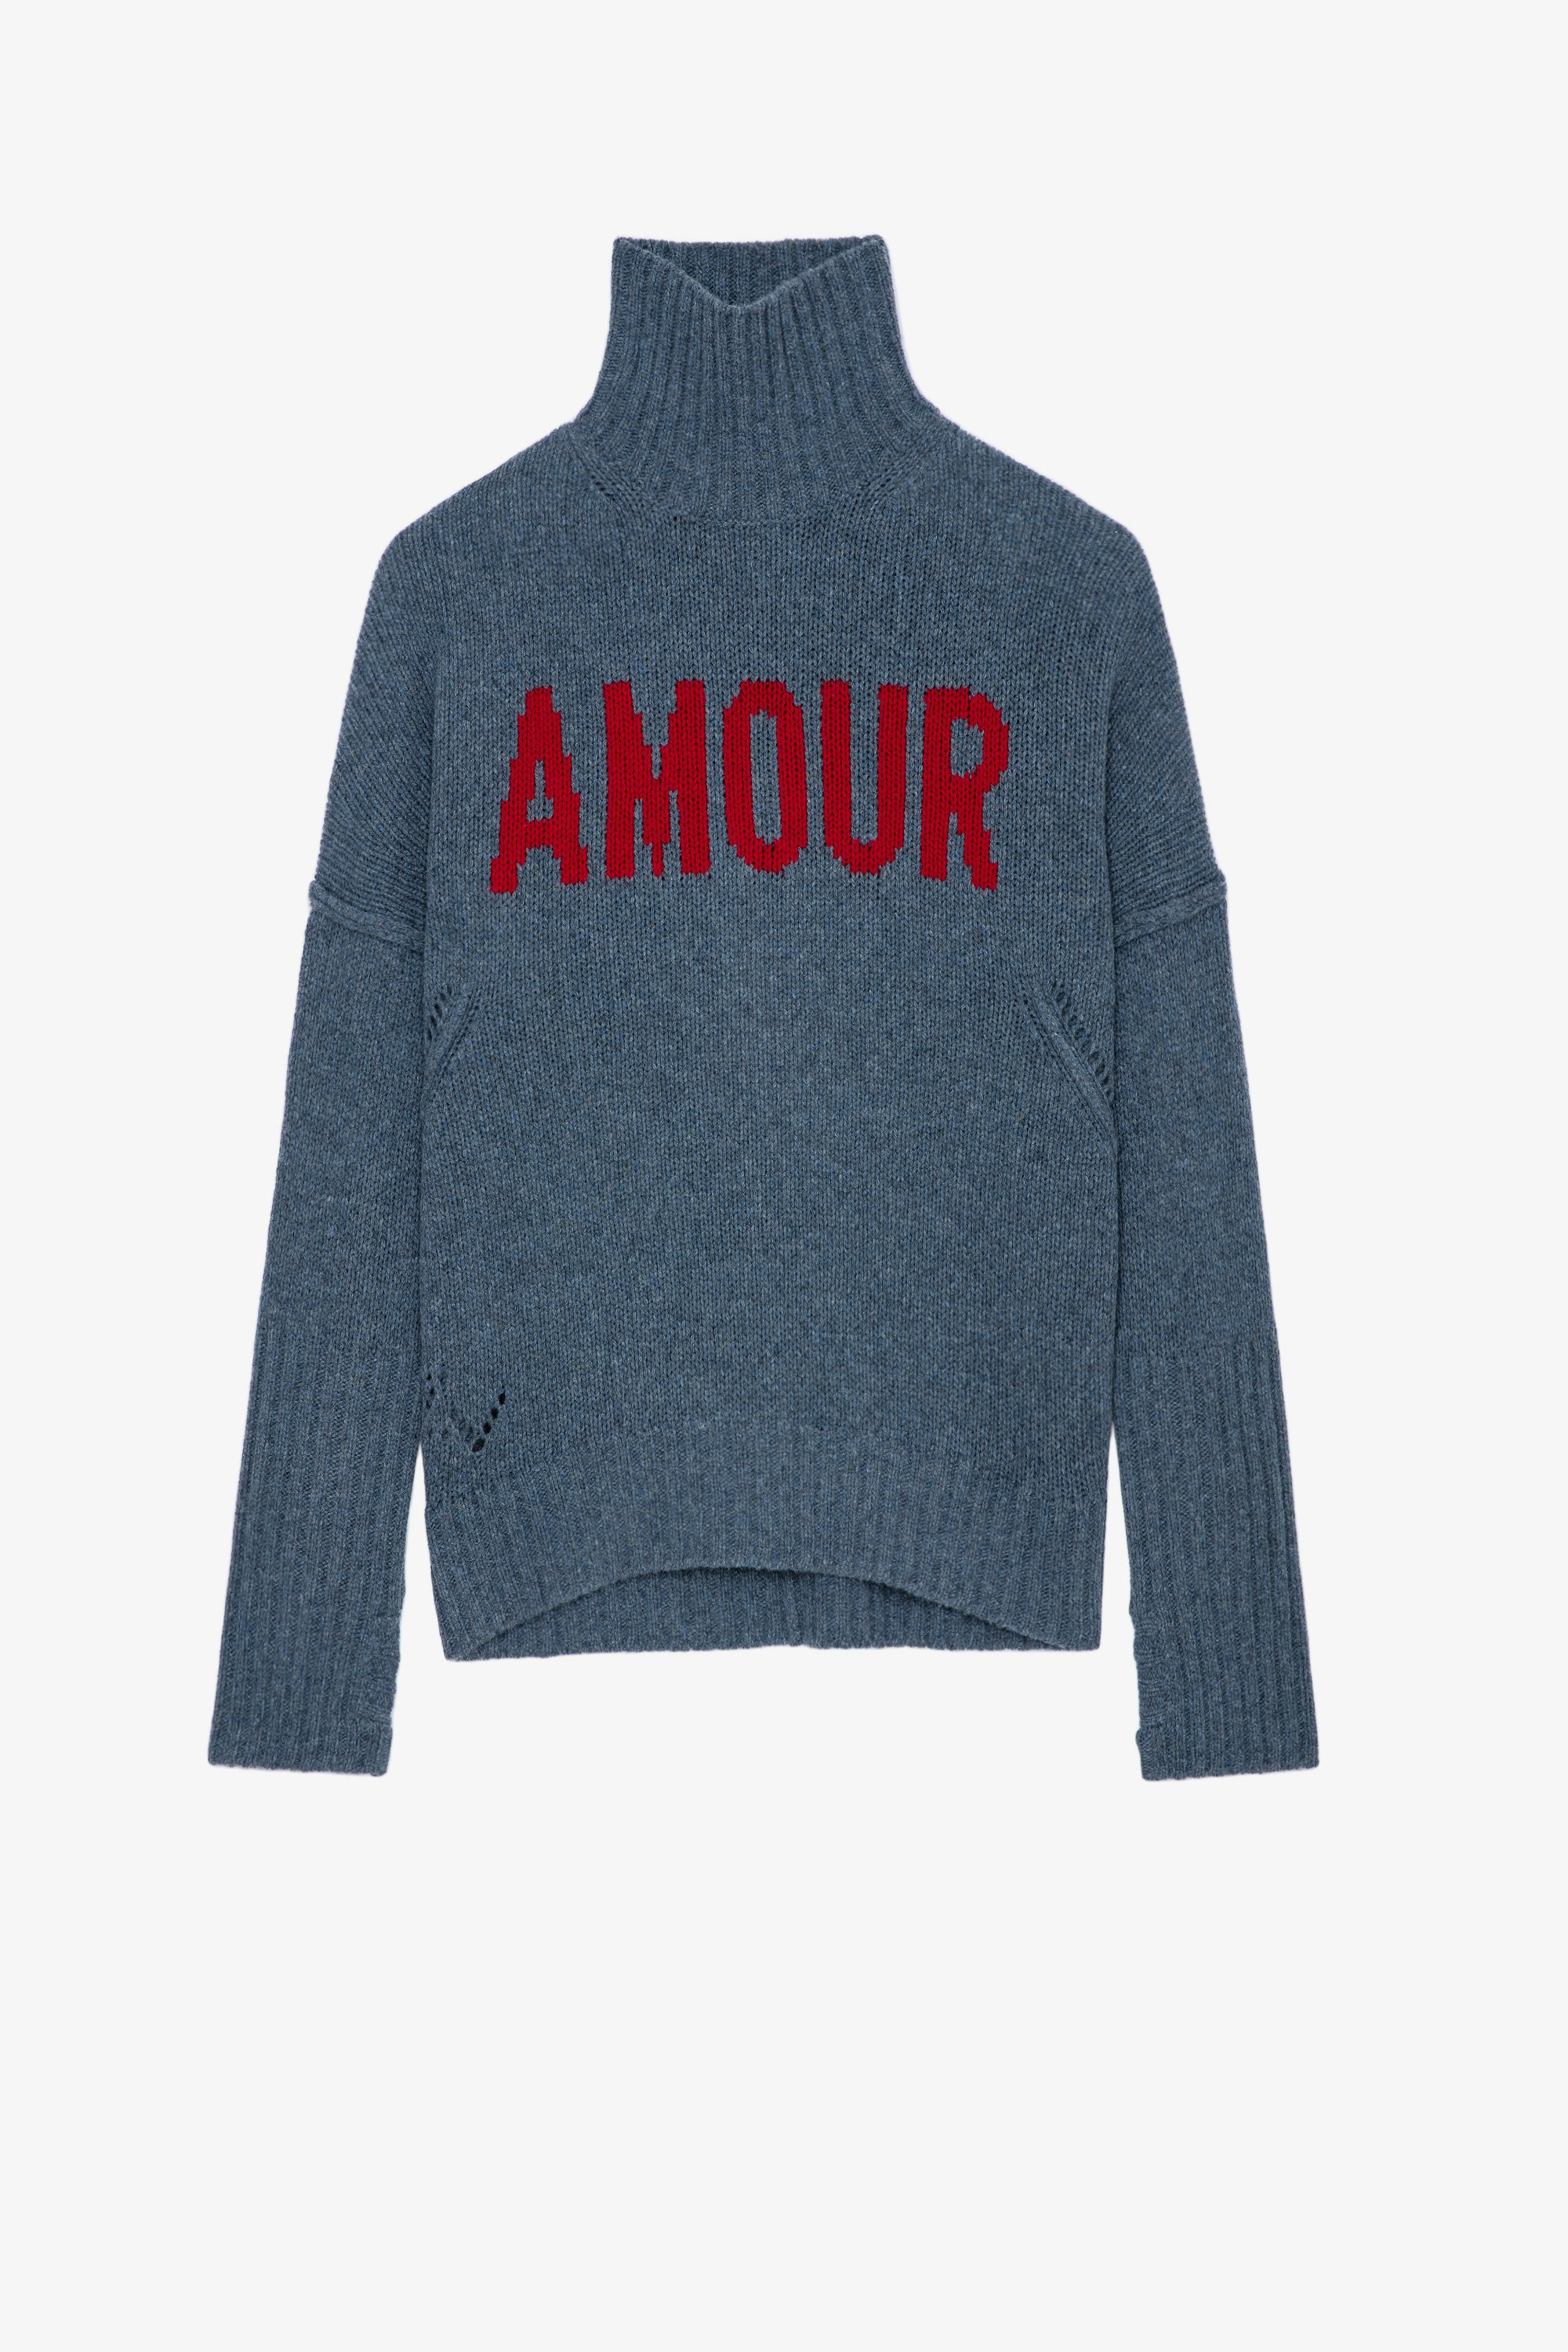 Alma We Amour Jumper Women’s blue knit turtleneck jumper with contrasting “Amour” slogan 